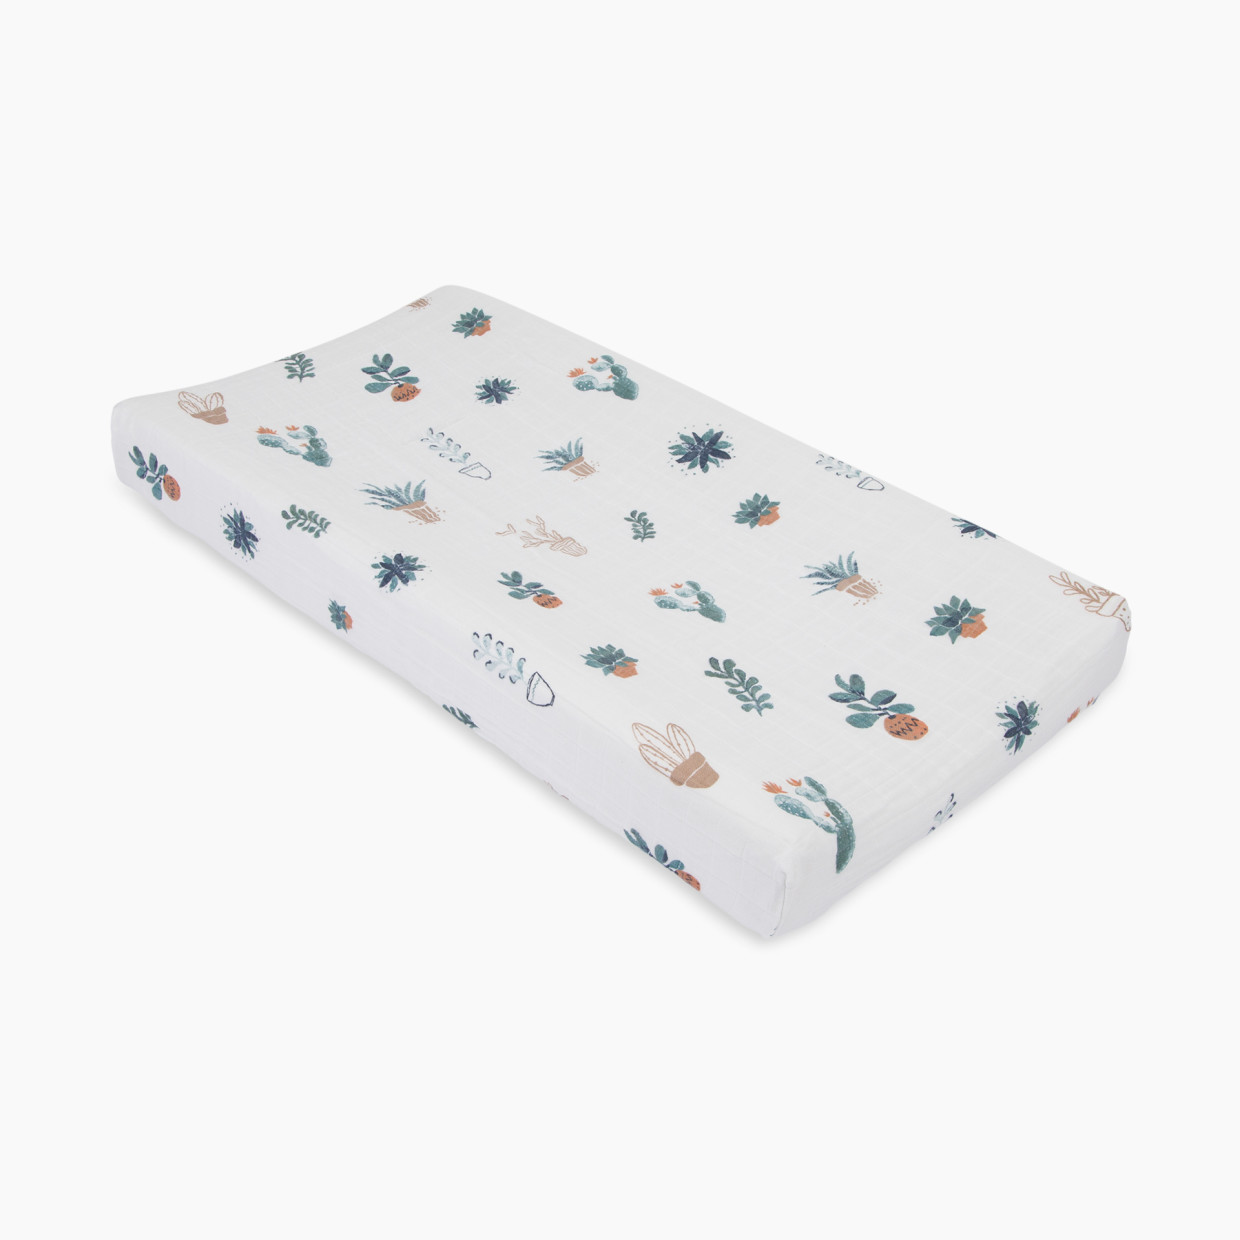 Little Unicorn Cotton Muslin Changing Pad Cover - Prickle Pots.